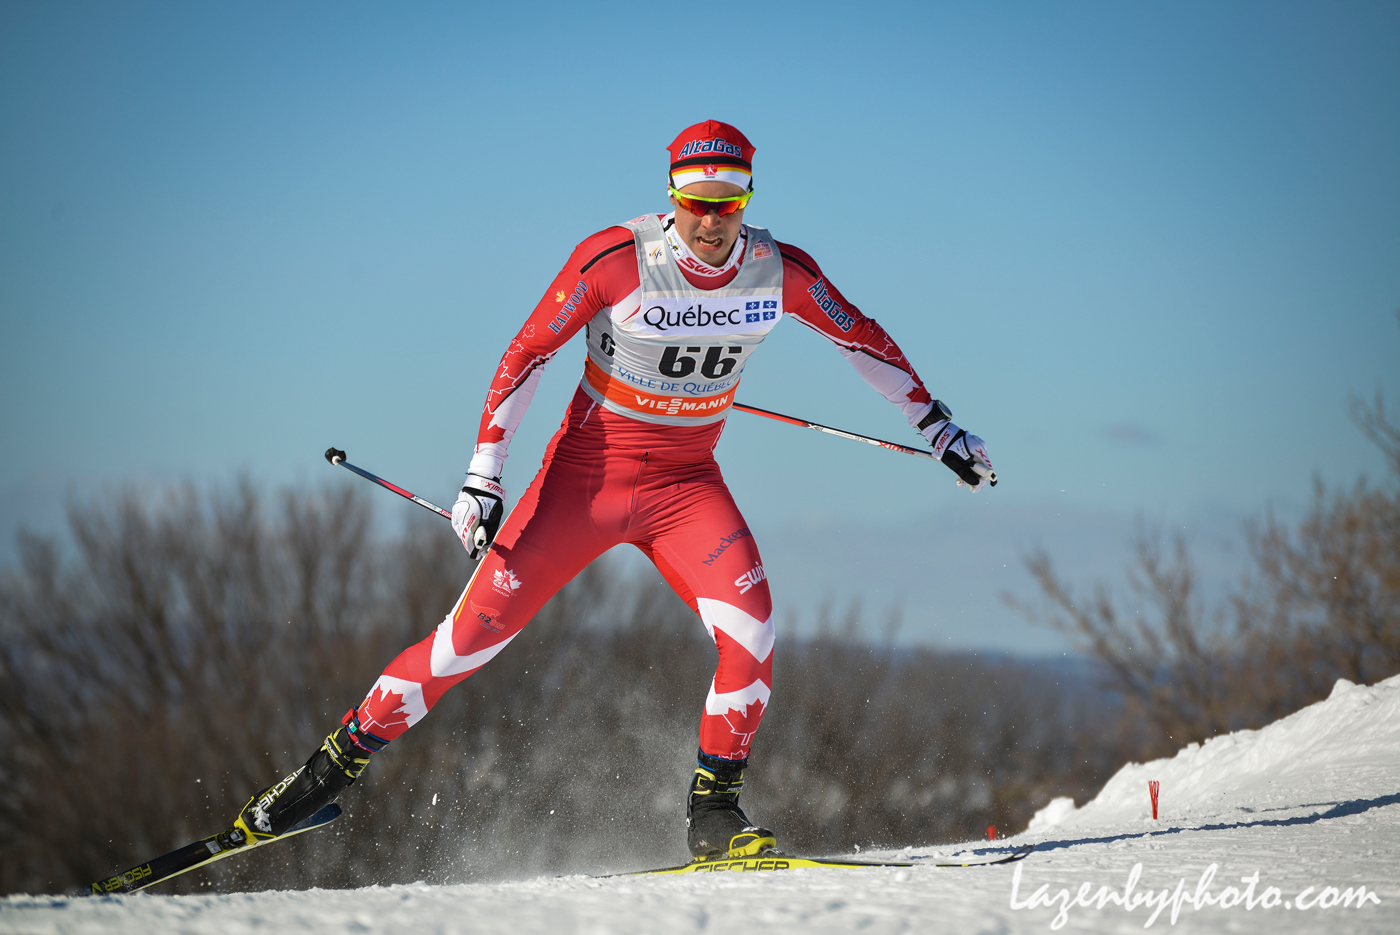 Jess Cockney racing to 29th in the freestyle sprint qualifier at Stage 3 of the Ski Tour Canada in Quebec City. (Photo: John Lazenby/Lazenbyphoto.com)